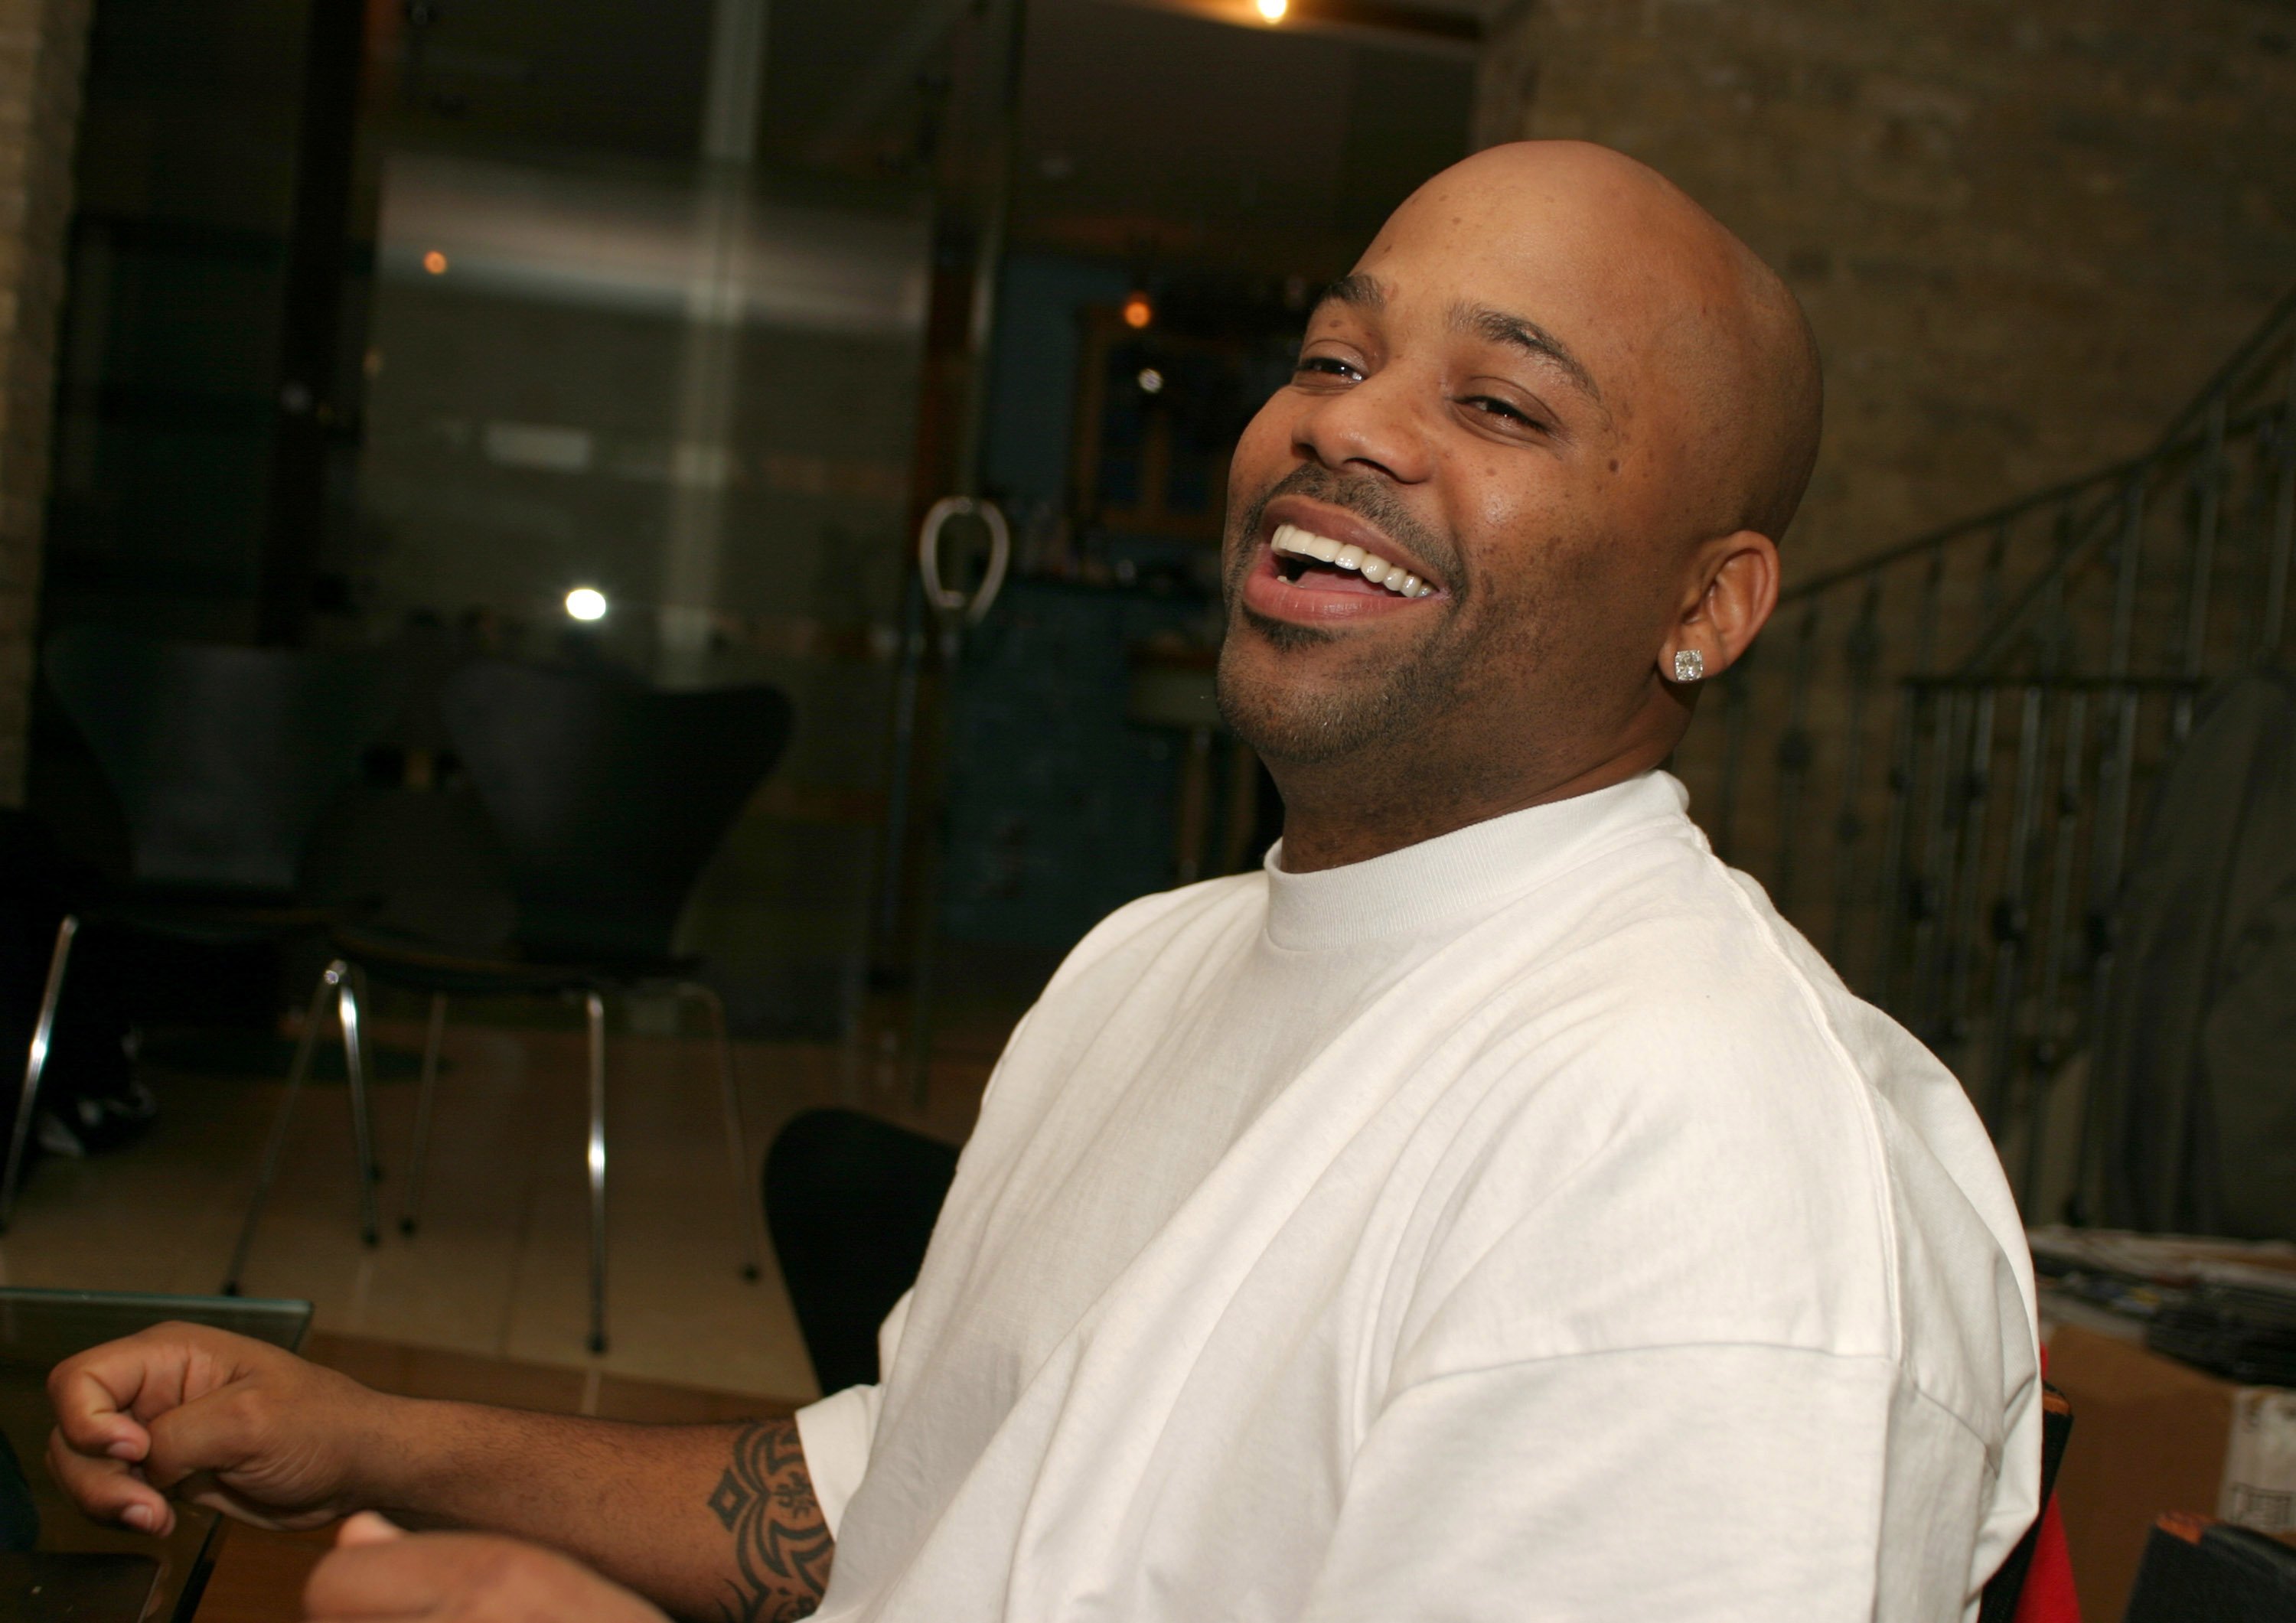 Damon Dash during a hosting event with Naomi Campbell for "America Magazine" UK Launch Party at Club Eve on April 14, 2004 in London, Great Britain. | Photo: Getty Images